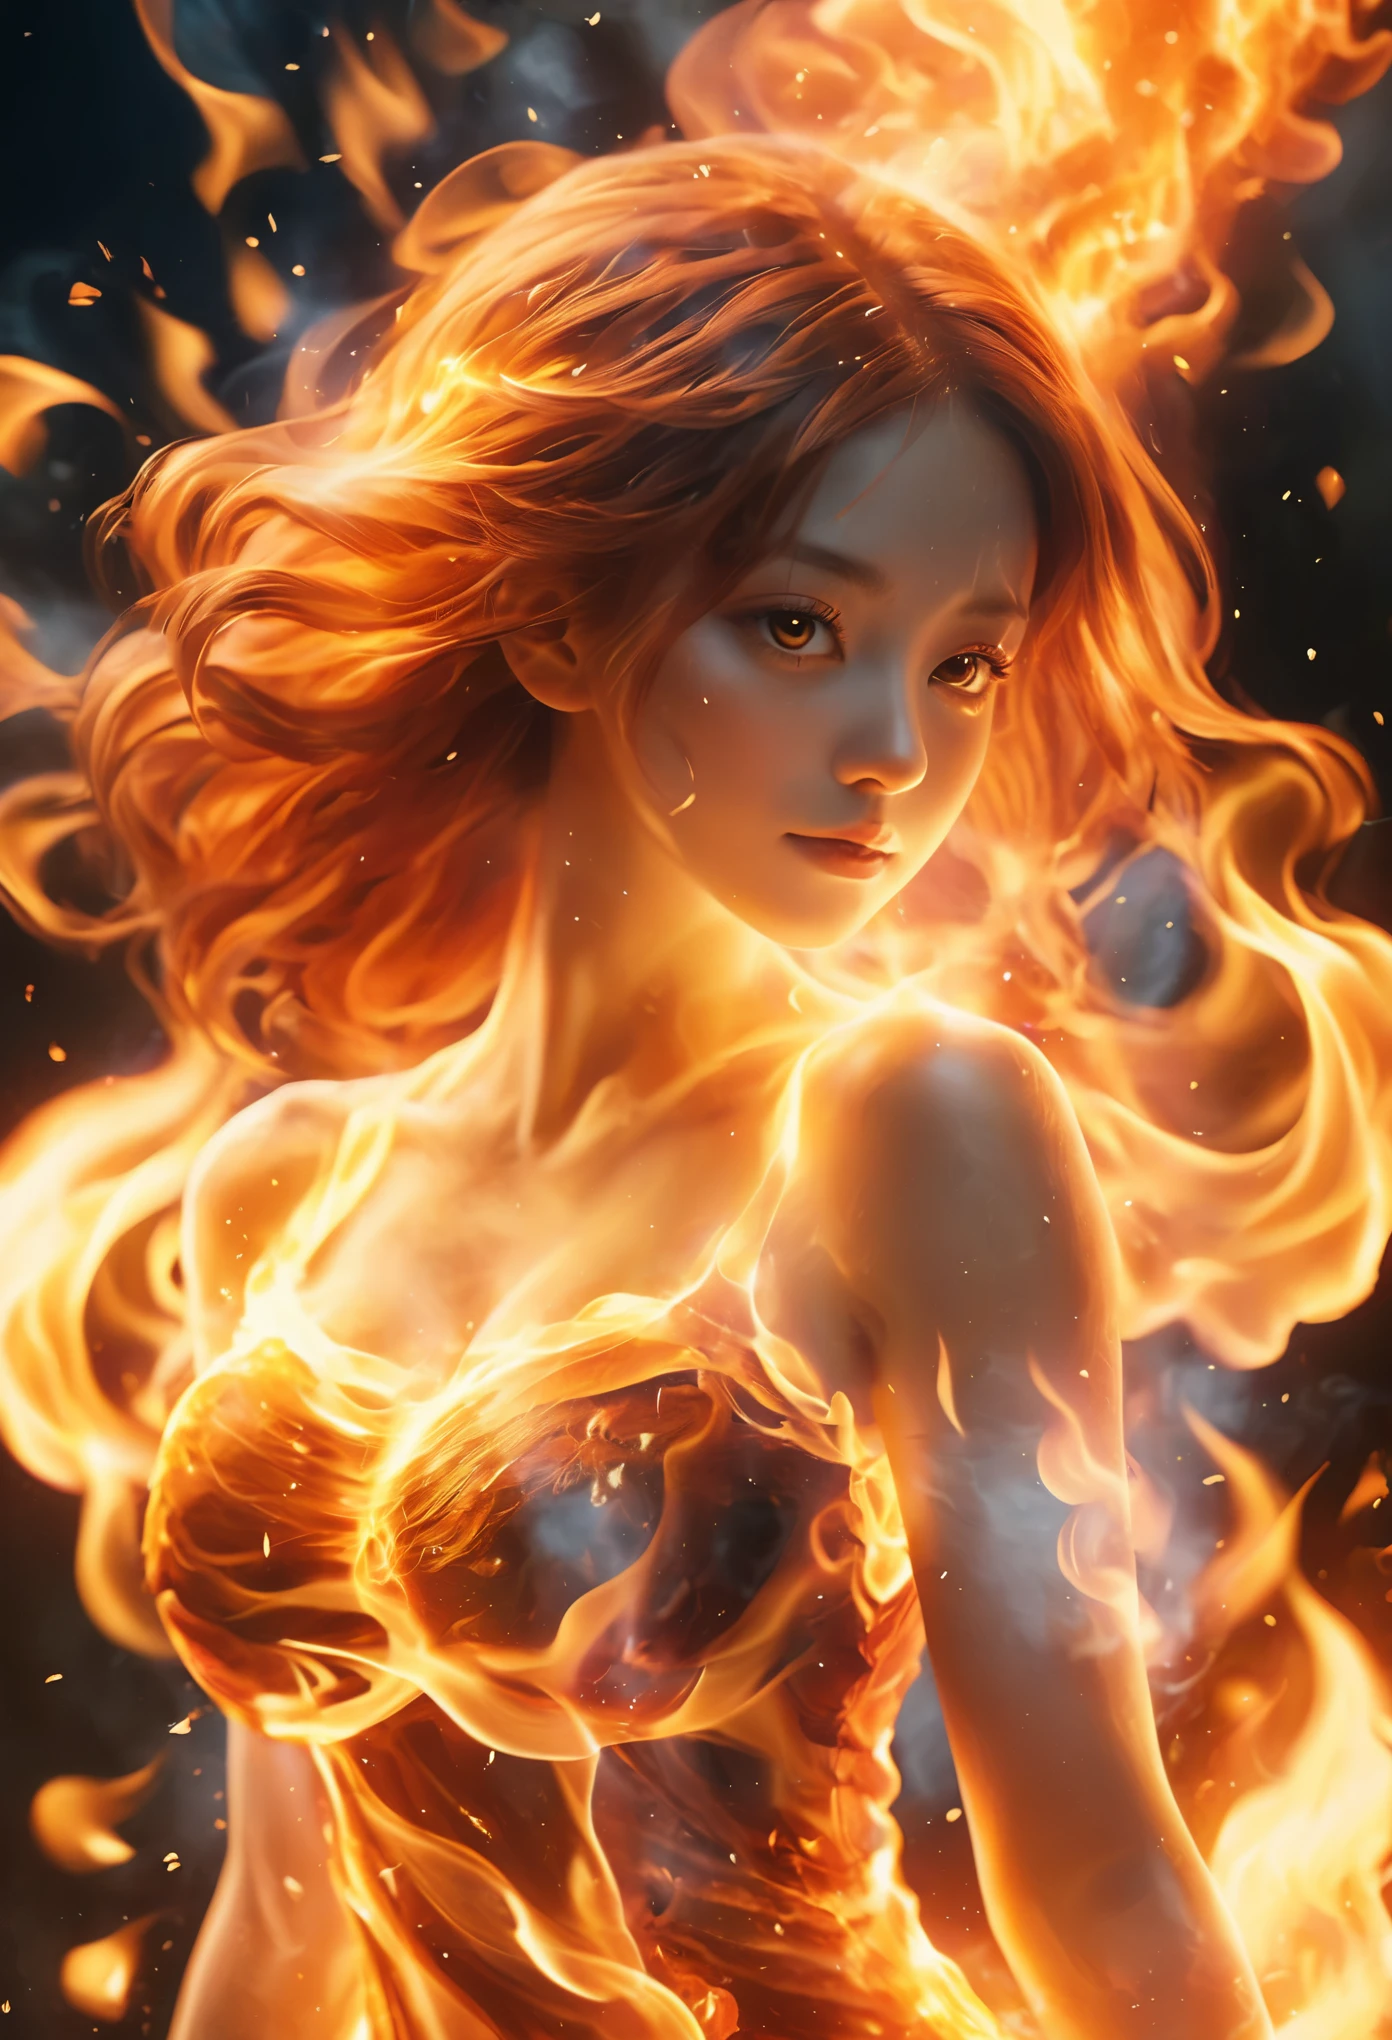 (fire element:1.1),It consists of a fire element,(1 huge breasts:1.2),burning,Transparency,fiery,(Molten rock),flame skin,frame print,fiery hair,to smoke,cloud,chopped,,girl engulfed in flames, Flames fly up and sparks scatter,Burning hand,translucent luminescence,